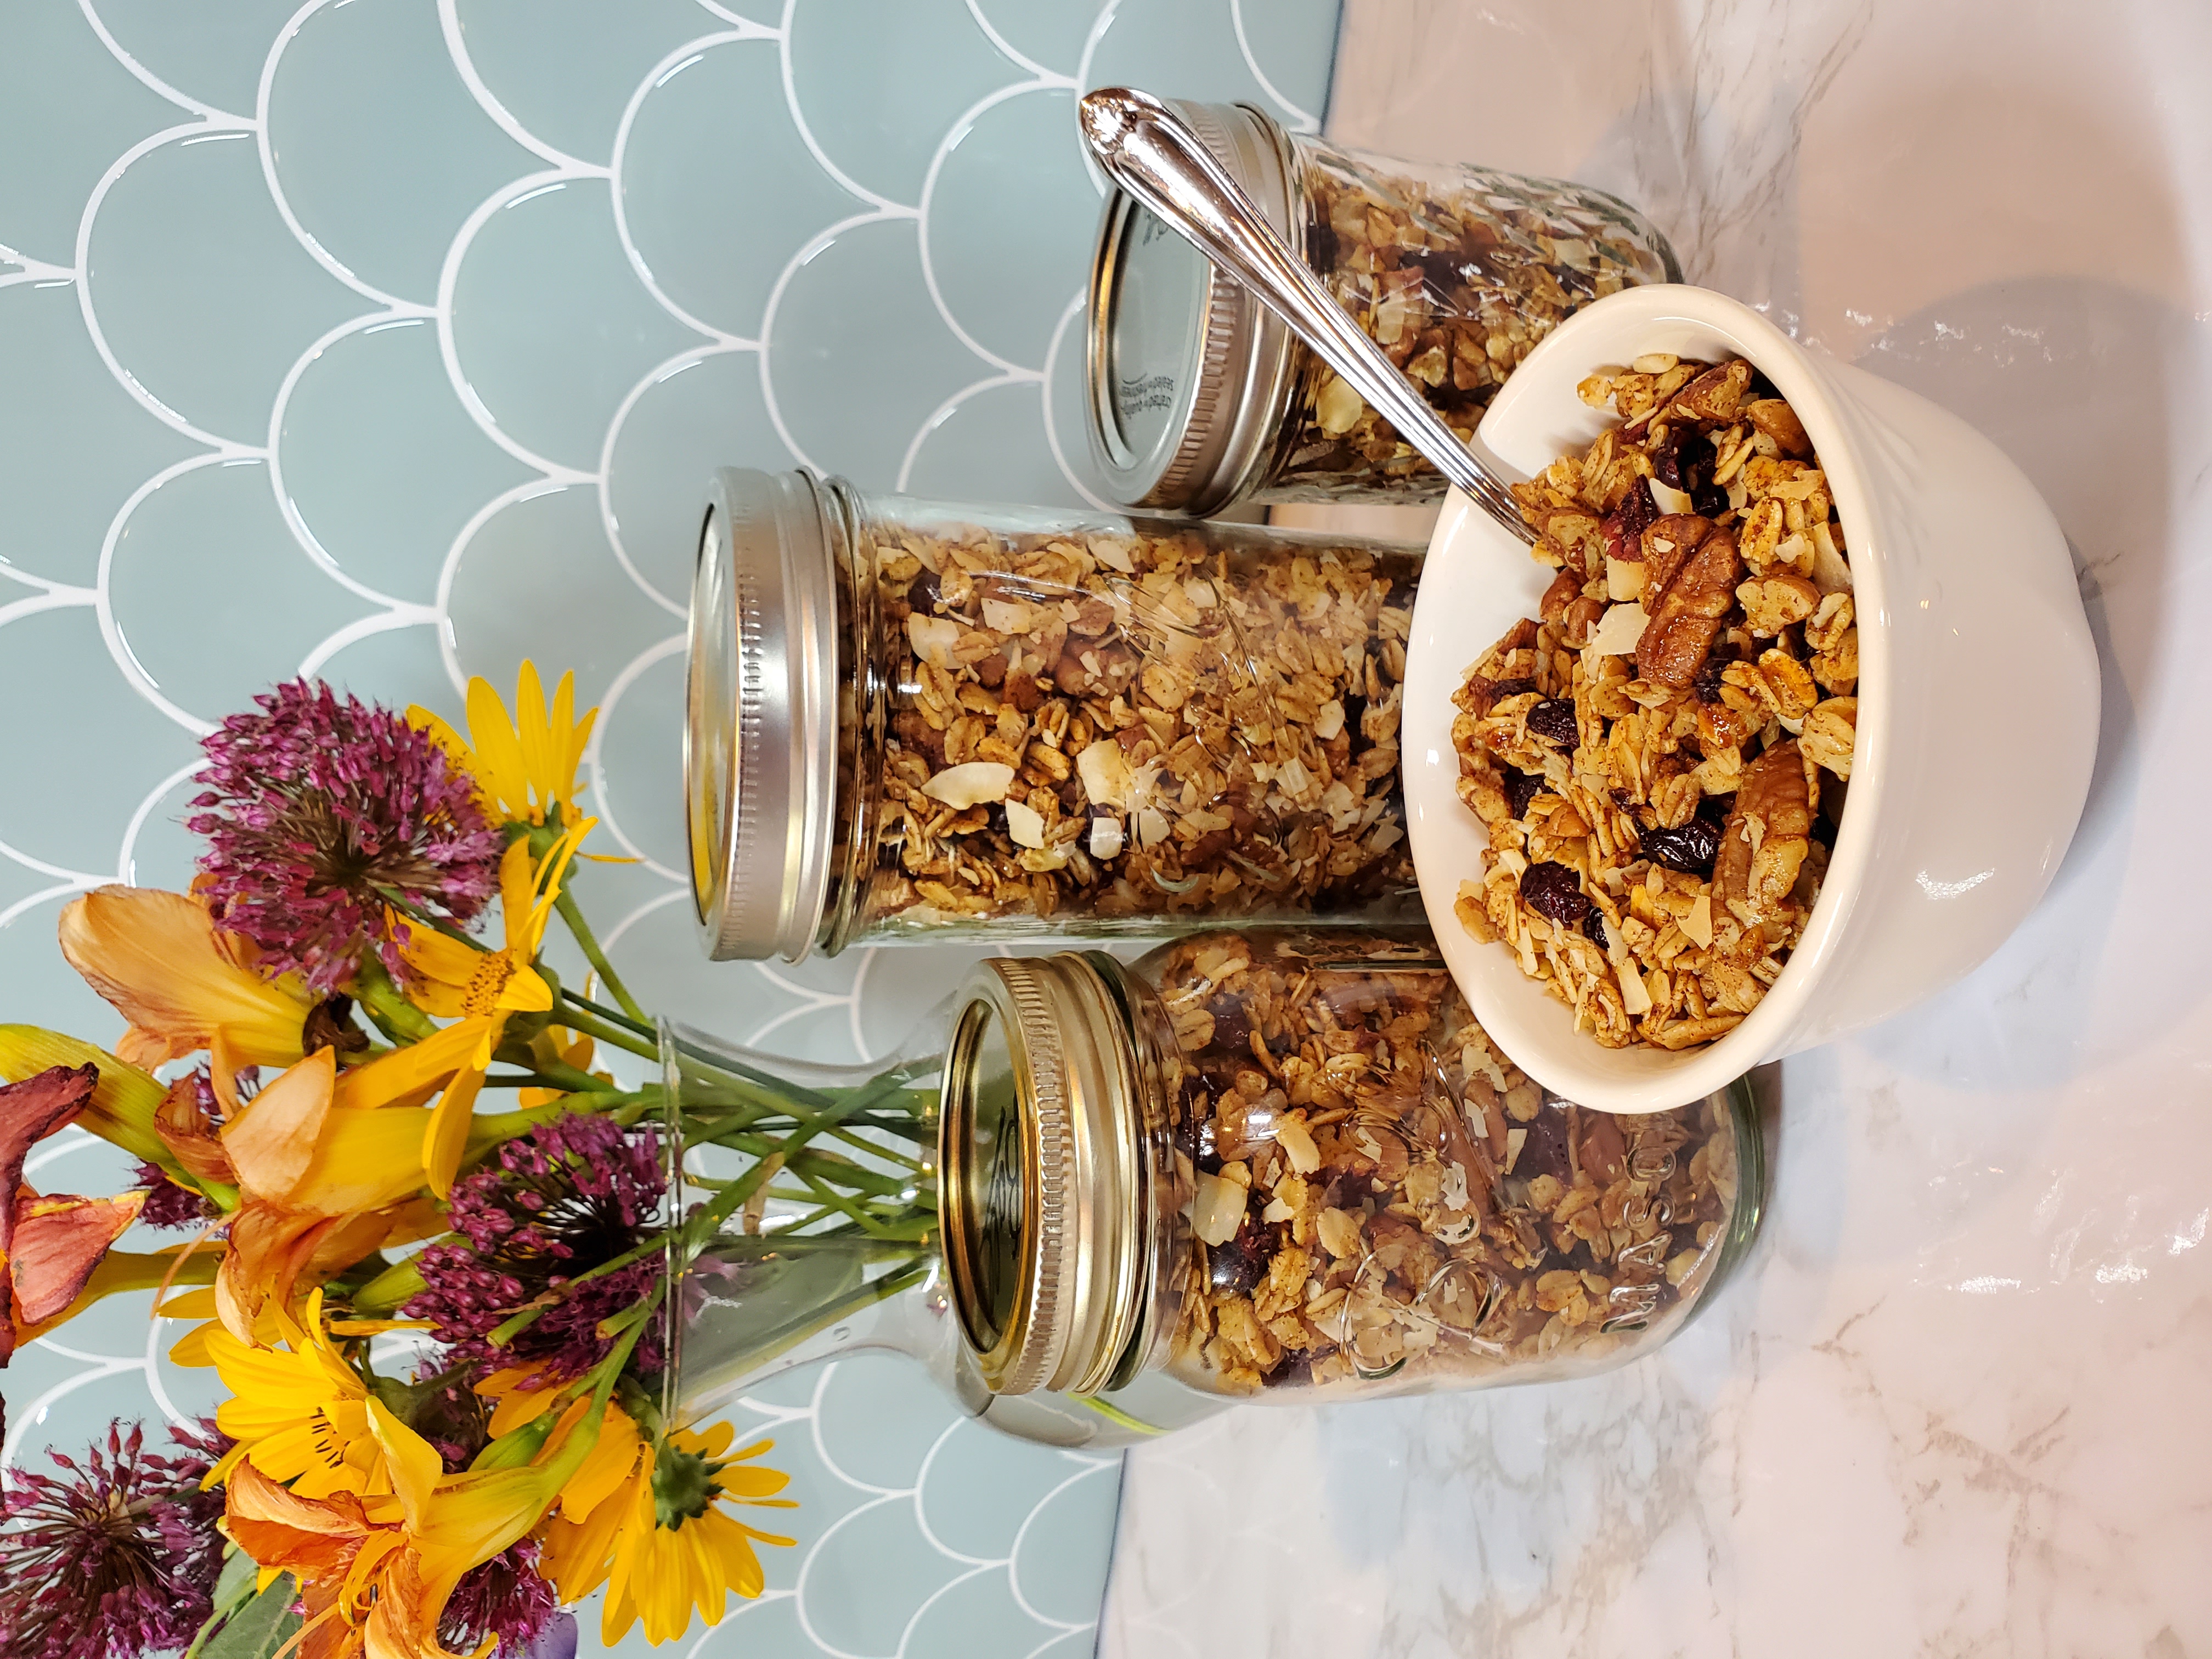 Three jars of granola sit behind a bowl of granola. Bits of pecans and craisins are visible. There is a siler spoon sticking out of the bowl and there is a vase full of flowers behind the scene, yellow, pink and purple.